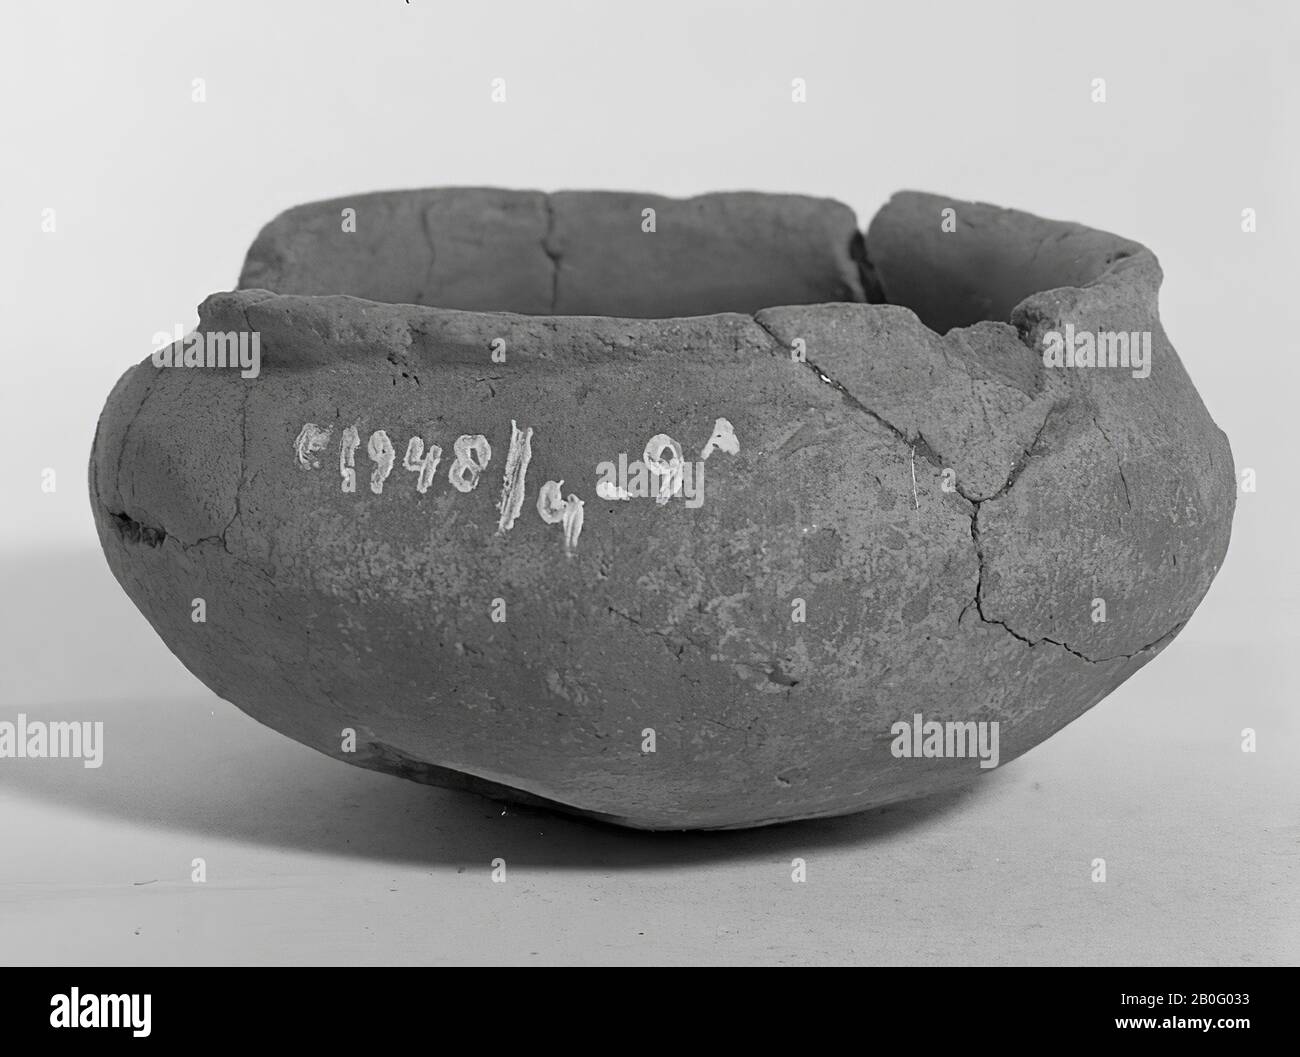 Small pot of pottery. Old bonding, cracking, open crack, surface damage. Contains cremated residues., Bee pot, pottery, h: 4.5 cm, diam: 9 cm, prehistory -800 Stock Photo